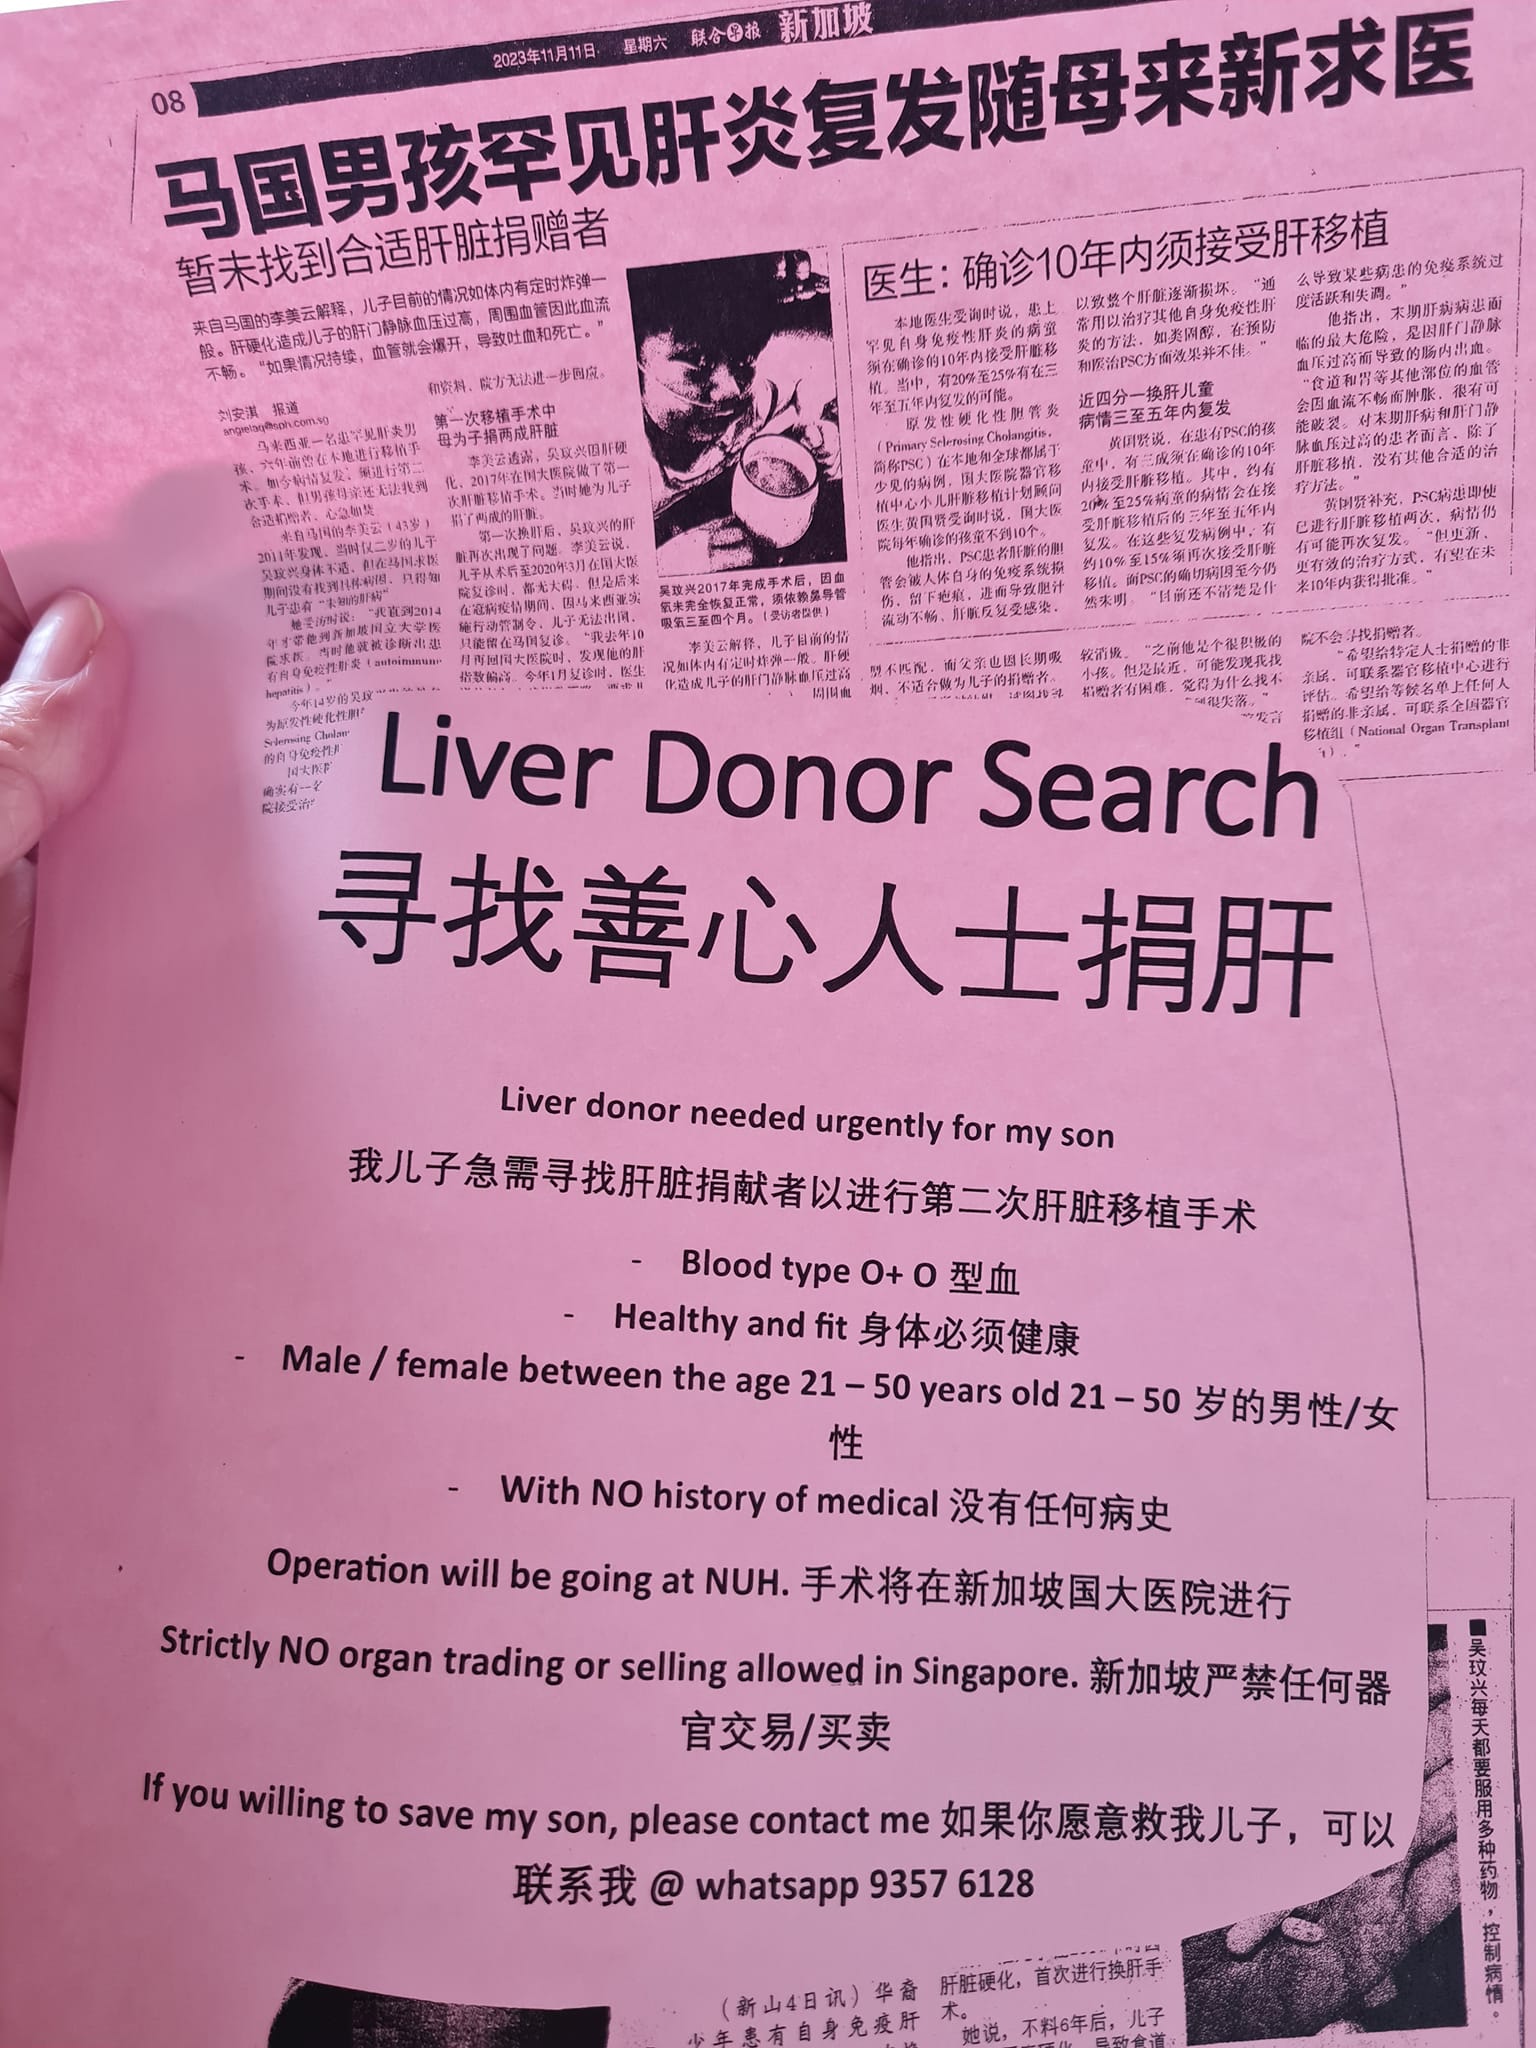 Poster being given out by boon heng